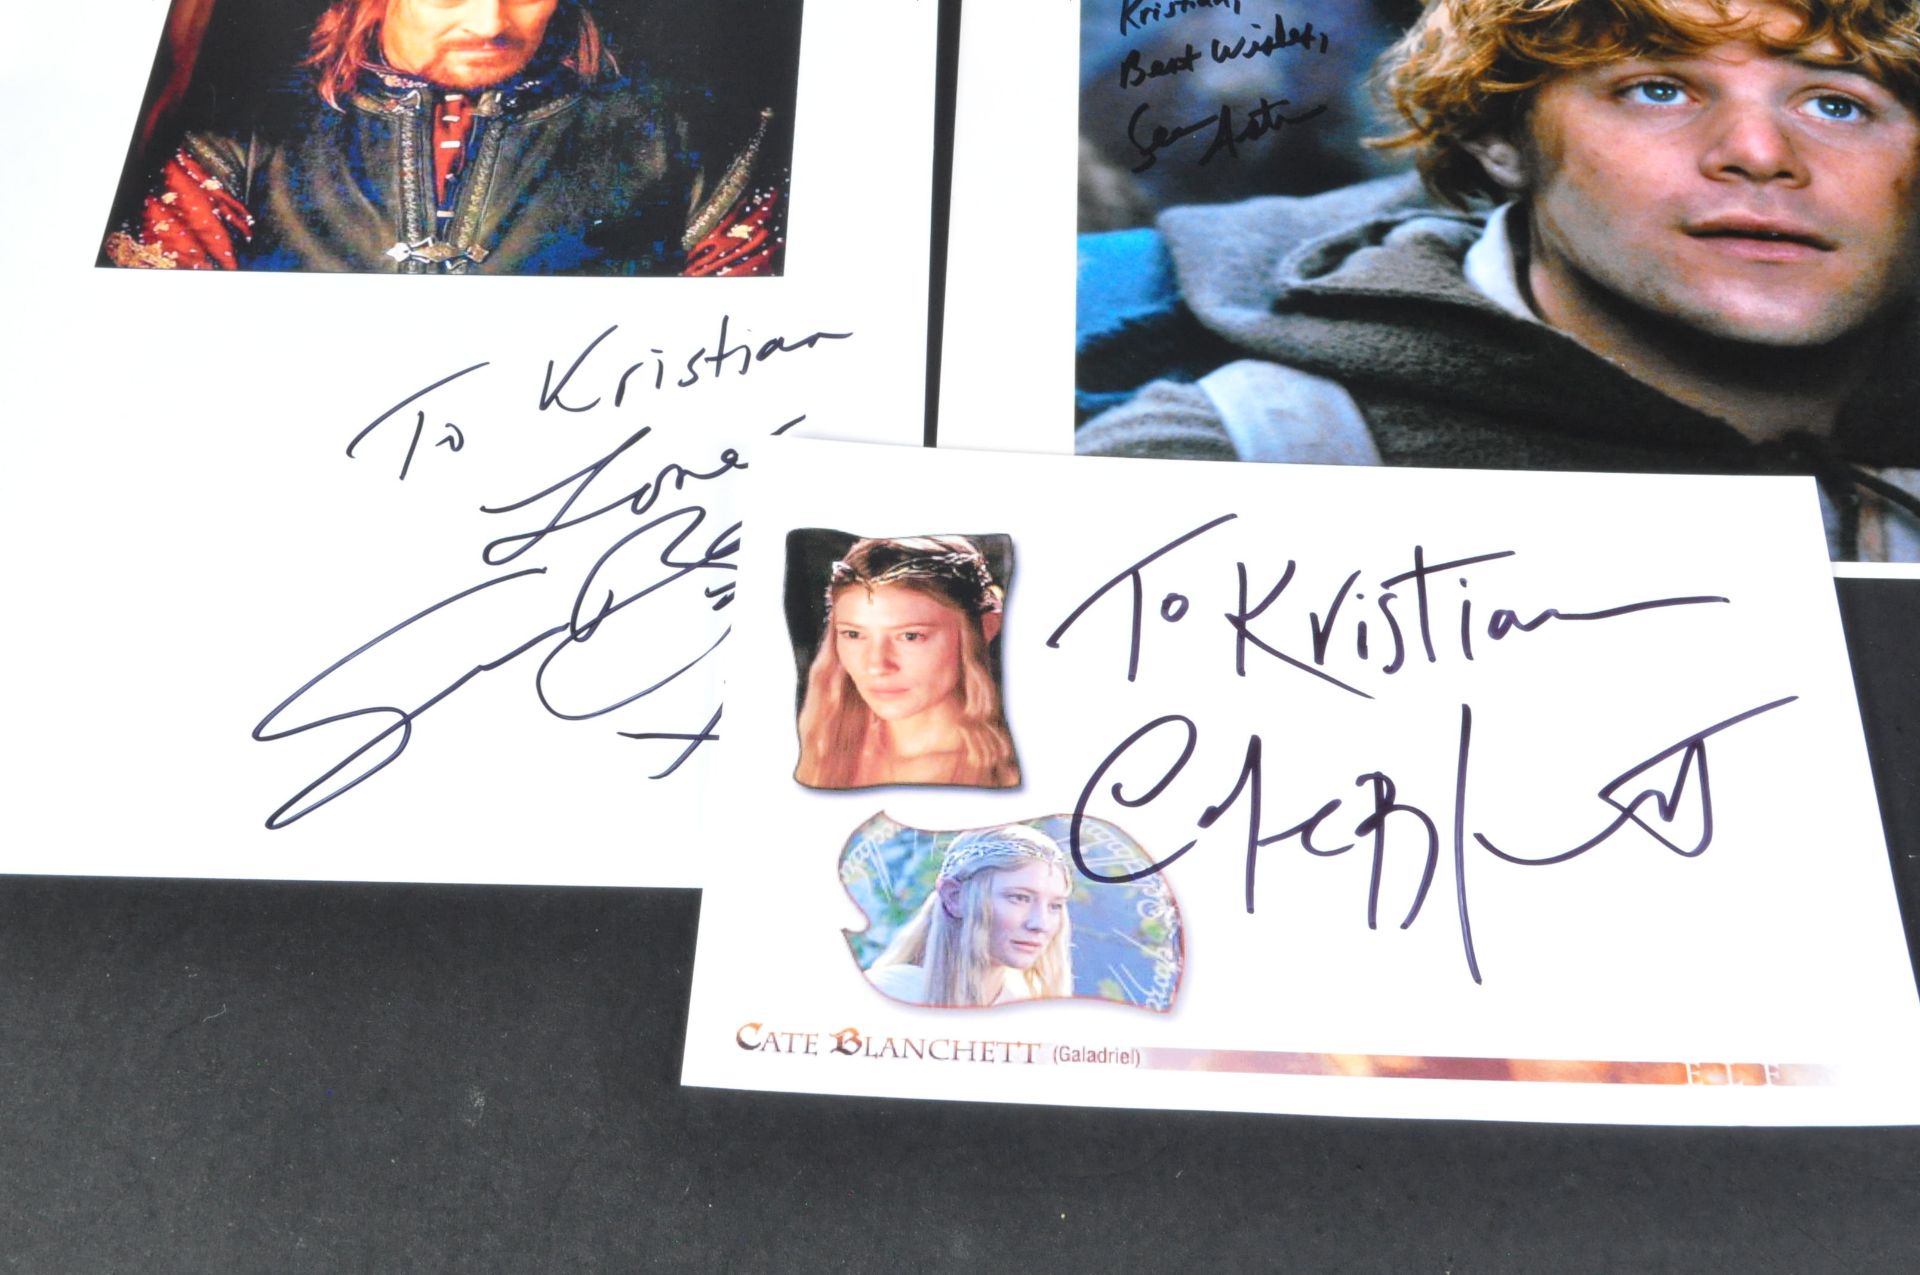 THE LORD OF THE RINGS - MAIN CAST AUTOGRAPHS - Image 2 of 3